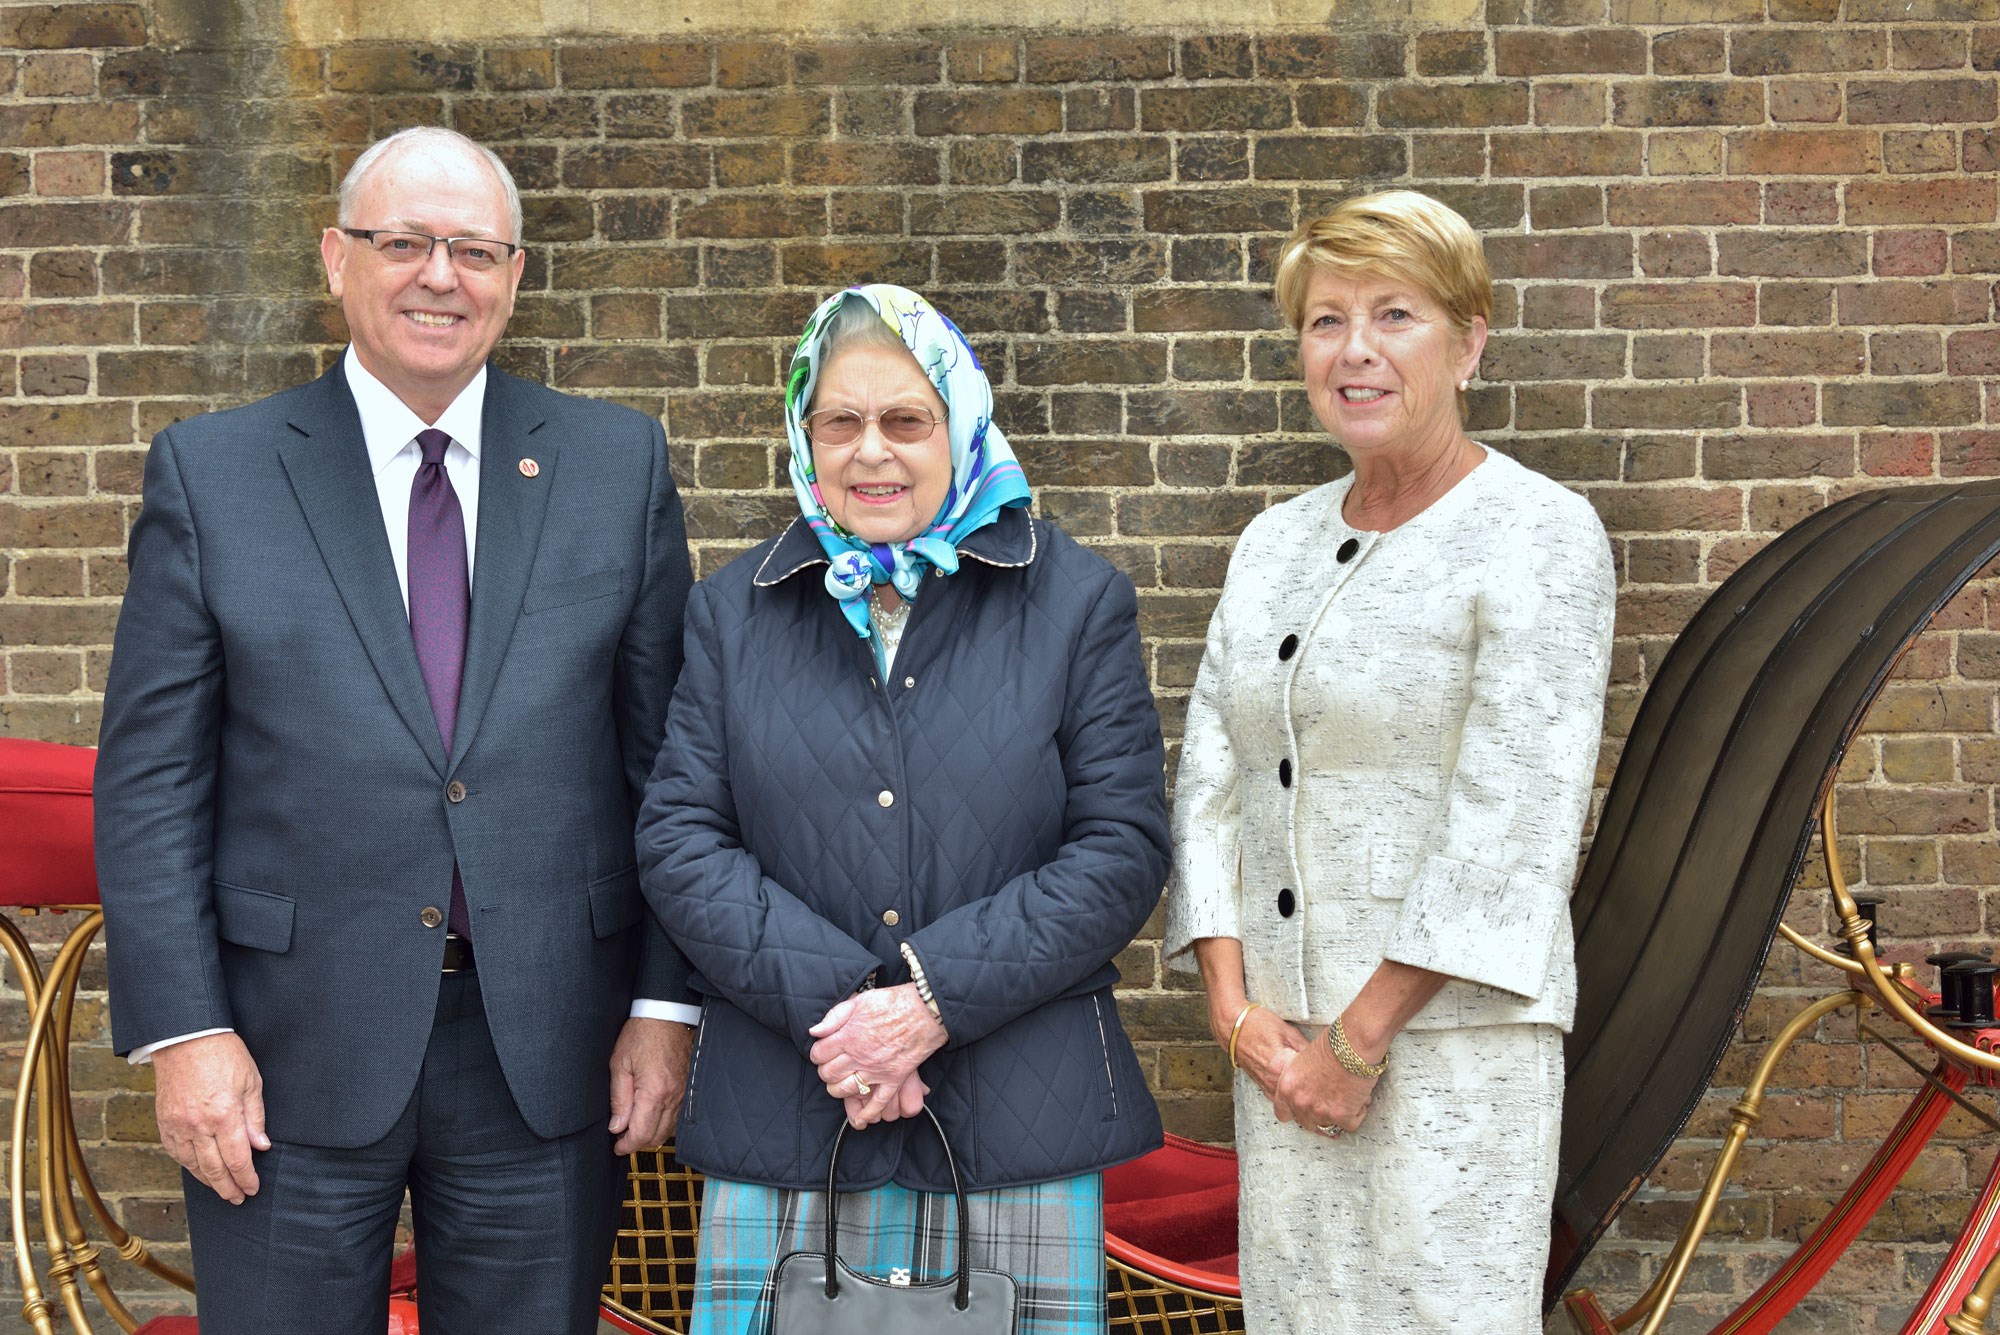 The Queen, centre, stands with Speaker of the Senate George J. Furey and his wife Karen Furey in the Royal Mews, Windsor Castle, in 2018.